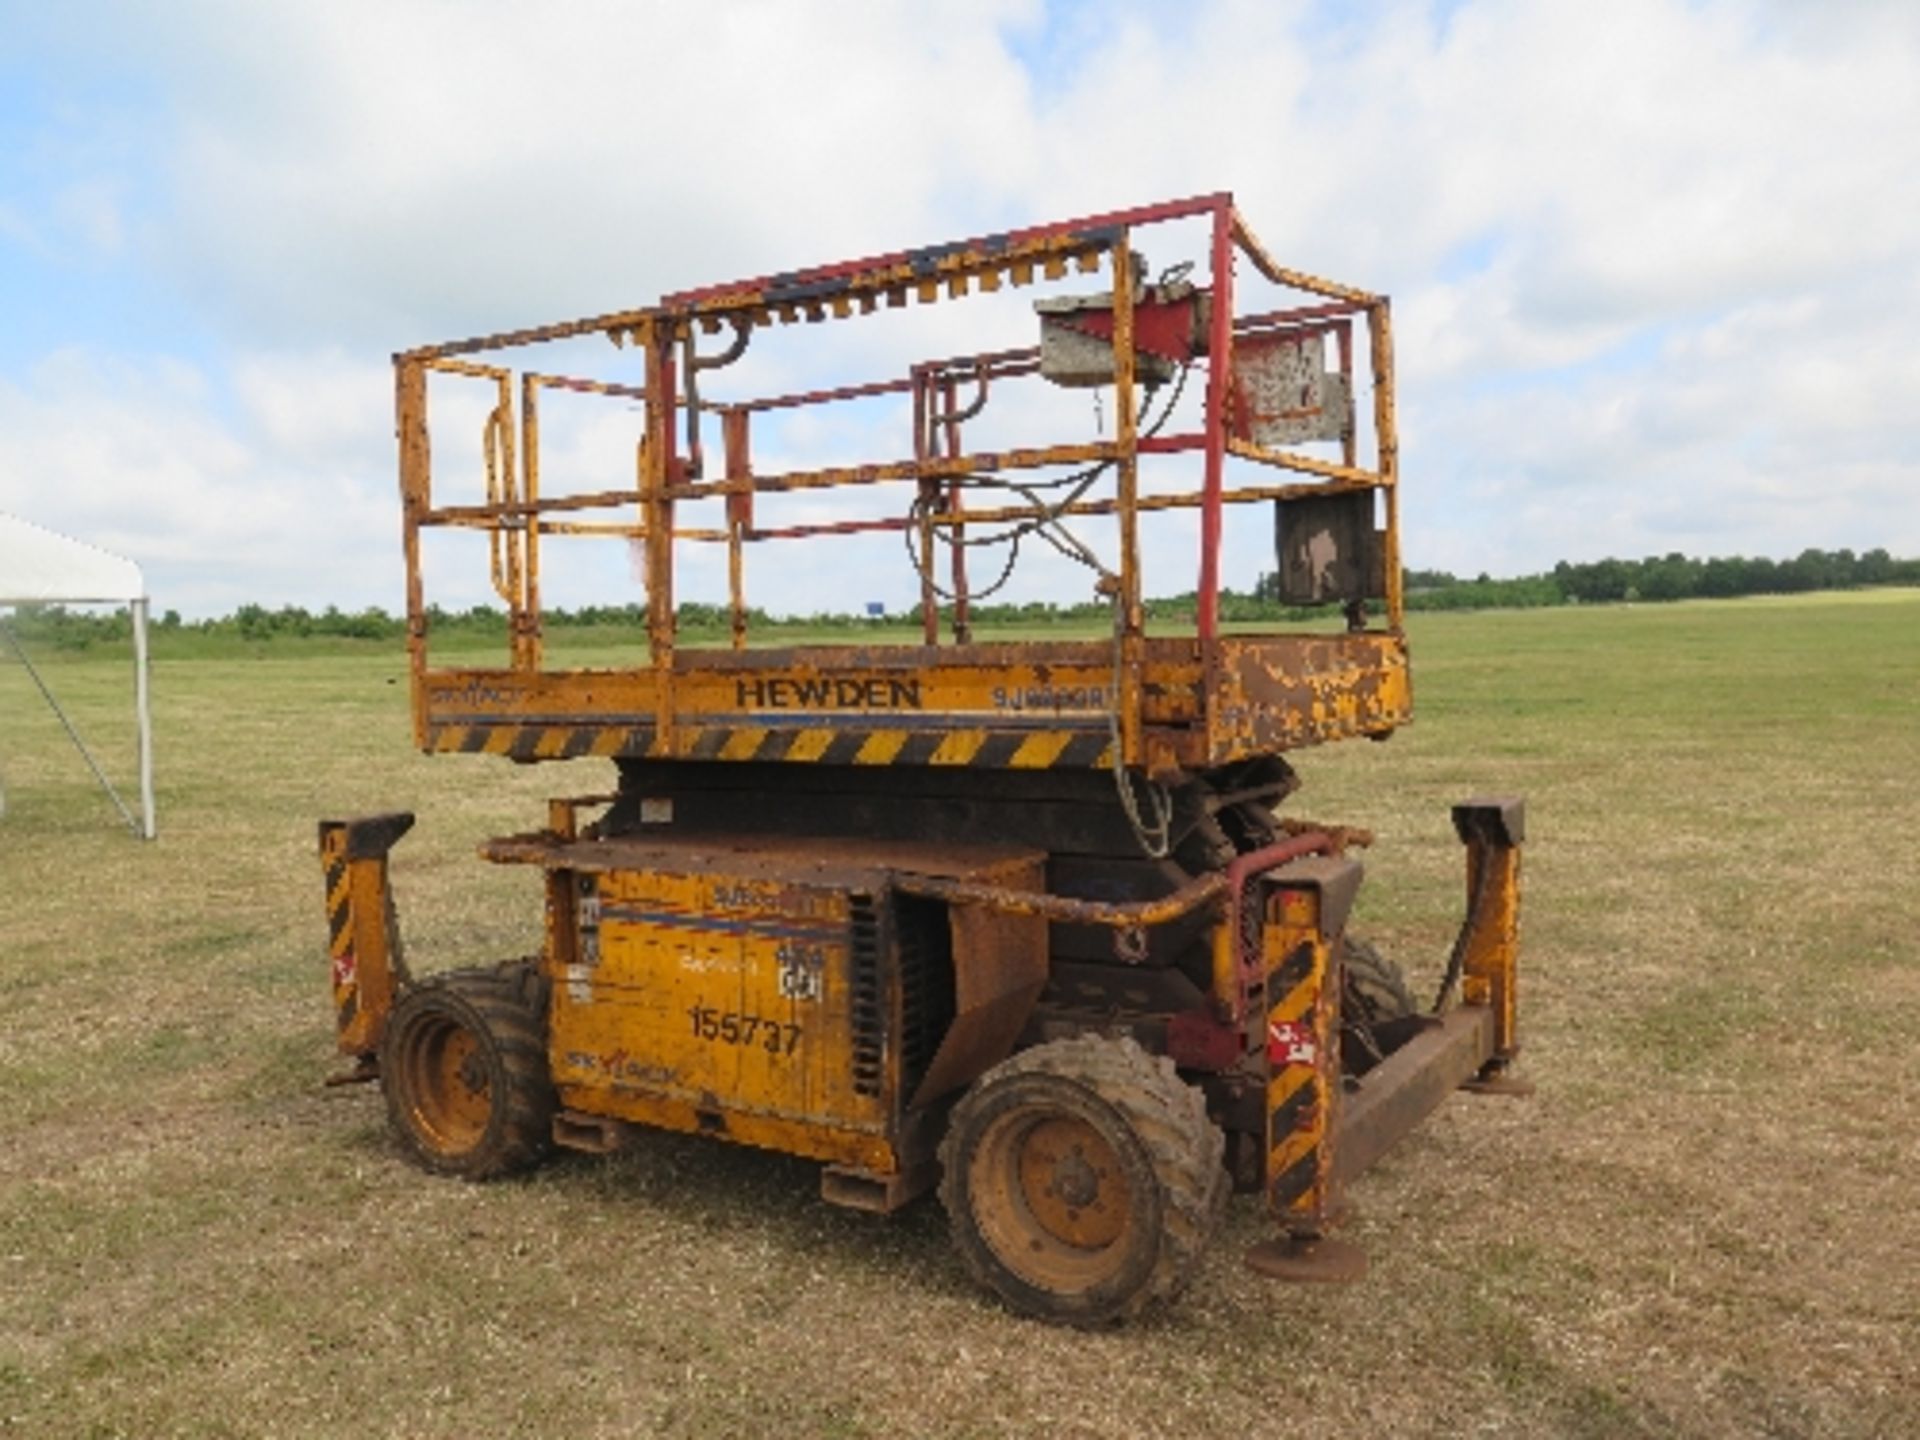 Skyjack 6832 scissor lift 155737
BELIEVED 2007
RUNS AND LIFTS
NO DRIVE
ALL LOTS are SOLD AS SEEN